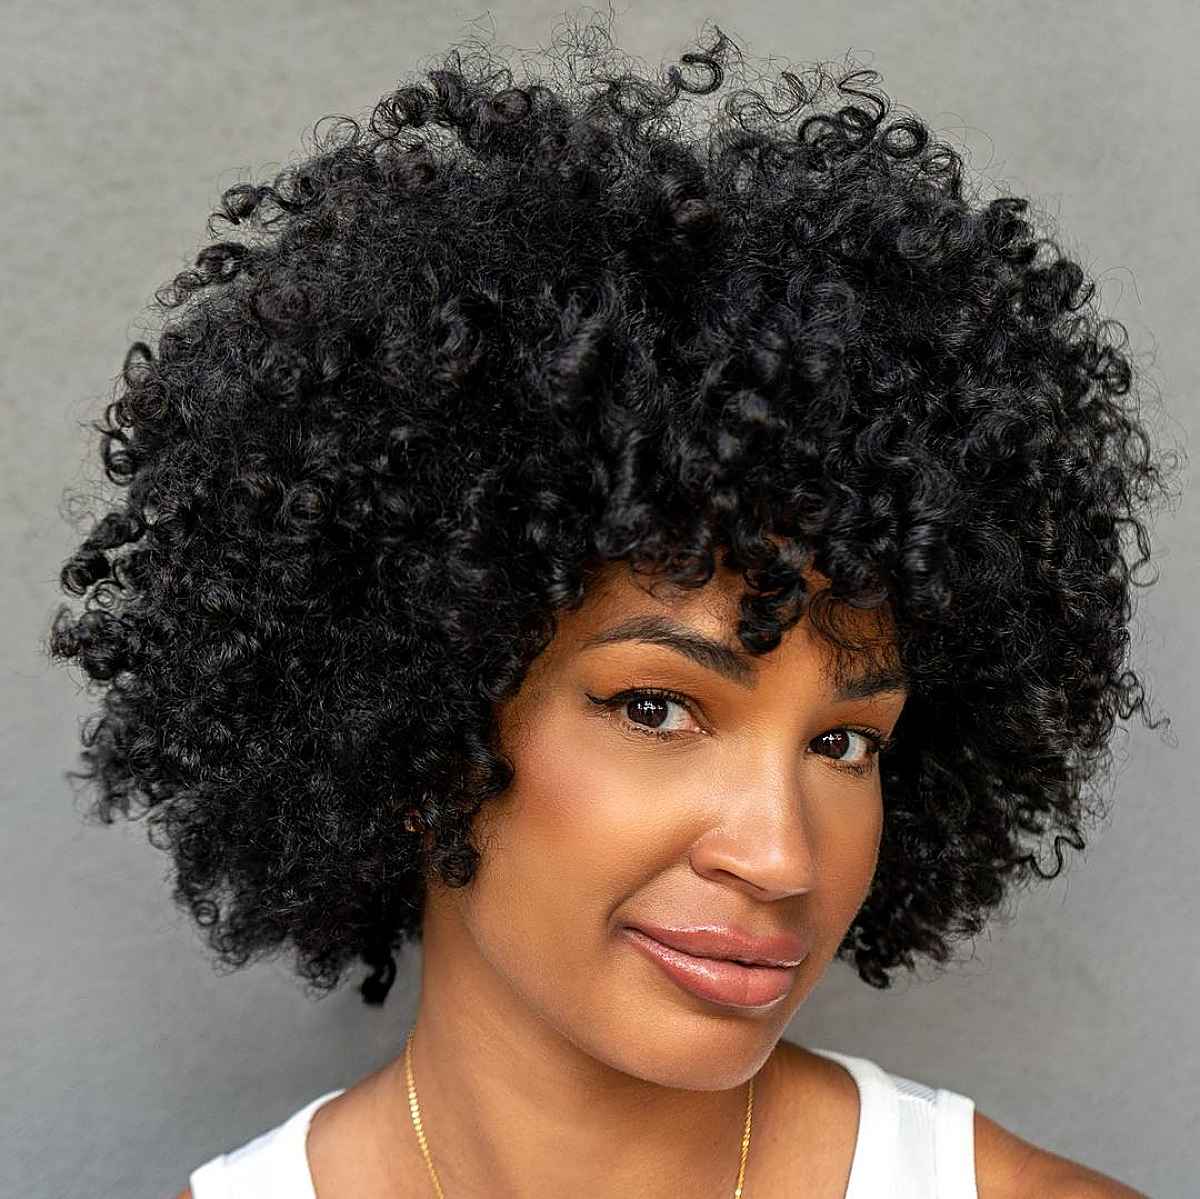 Short Bob for Thick Curly Hair